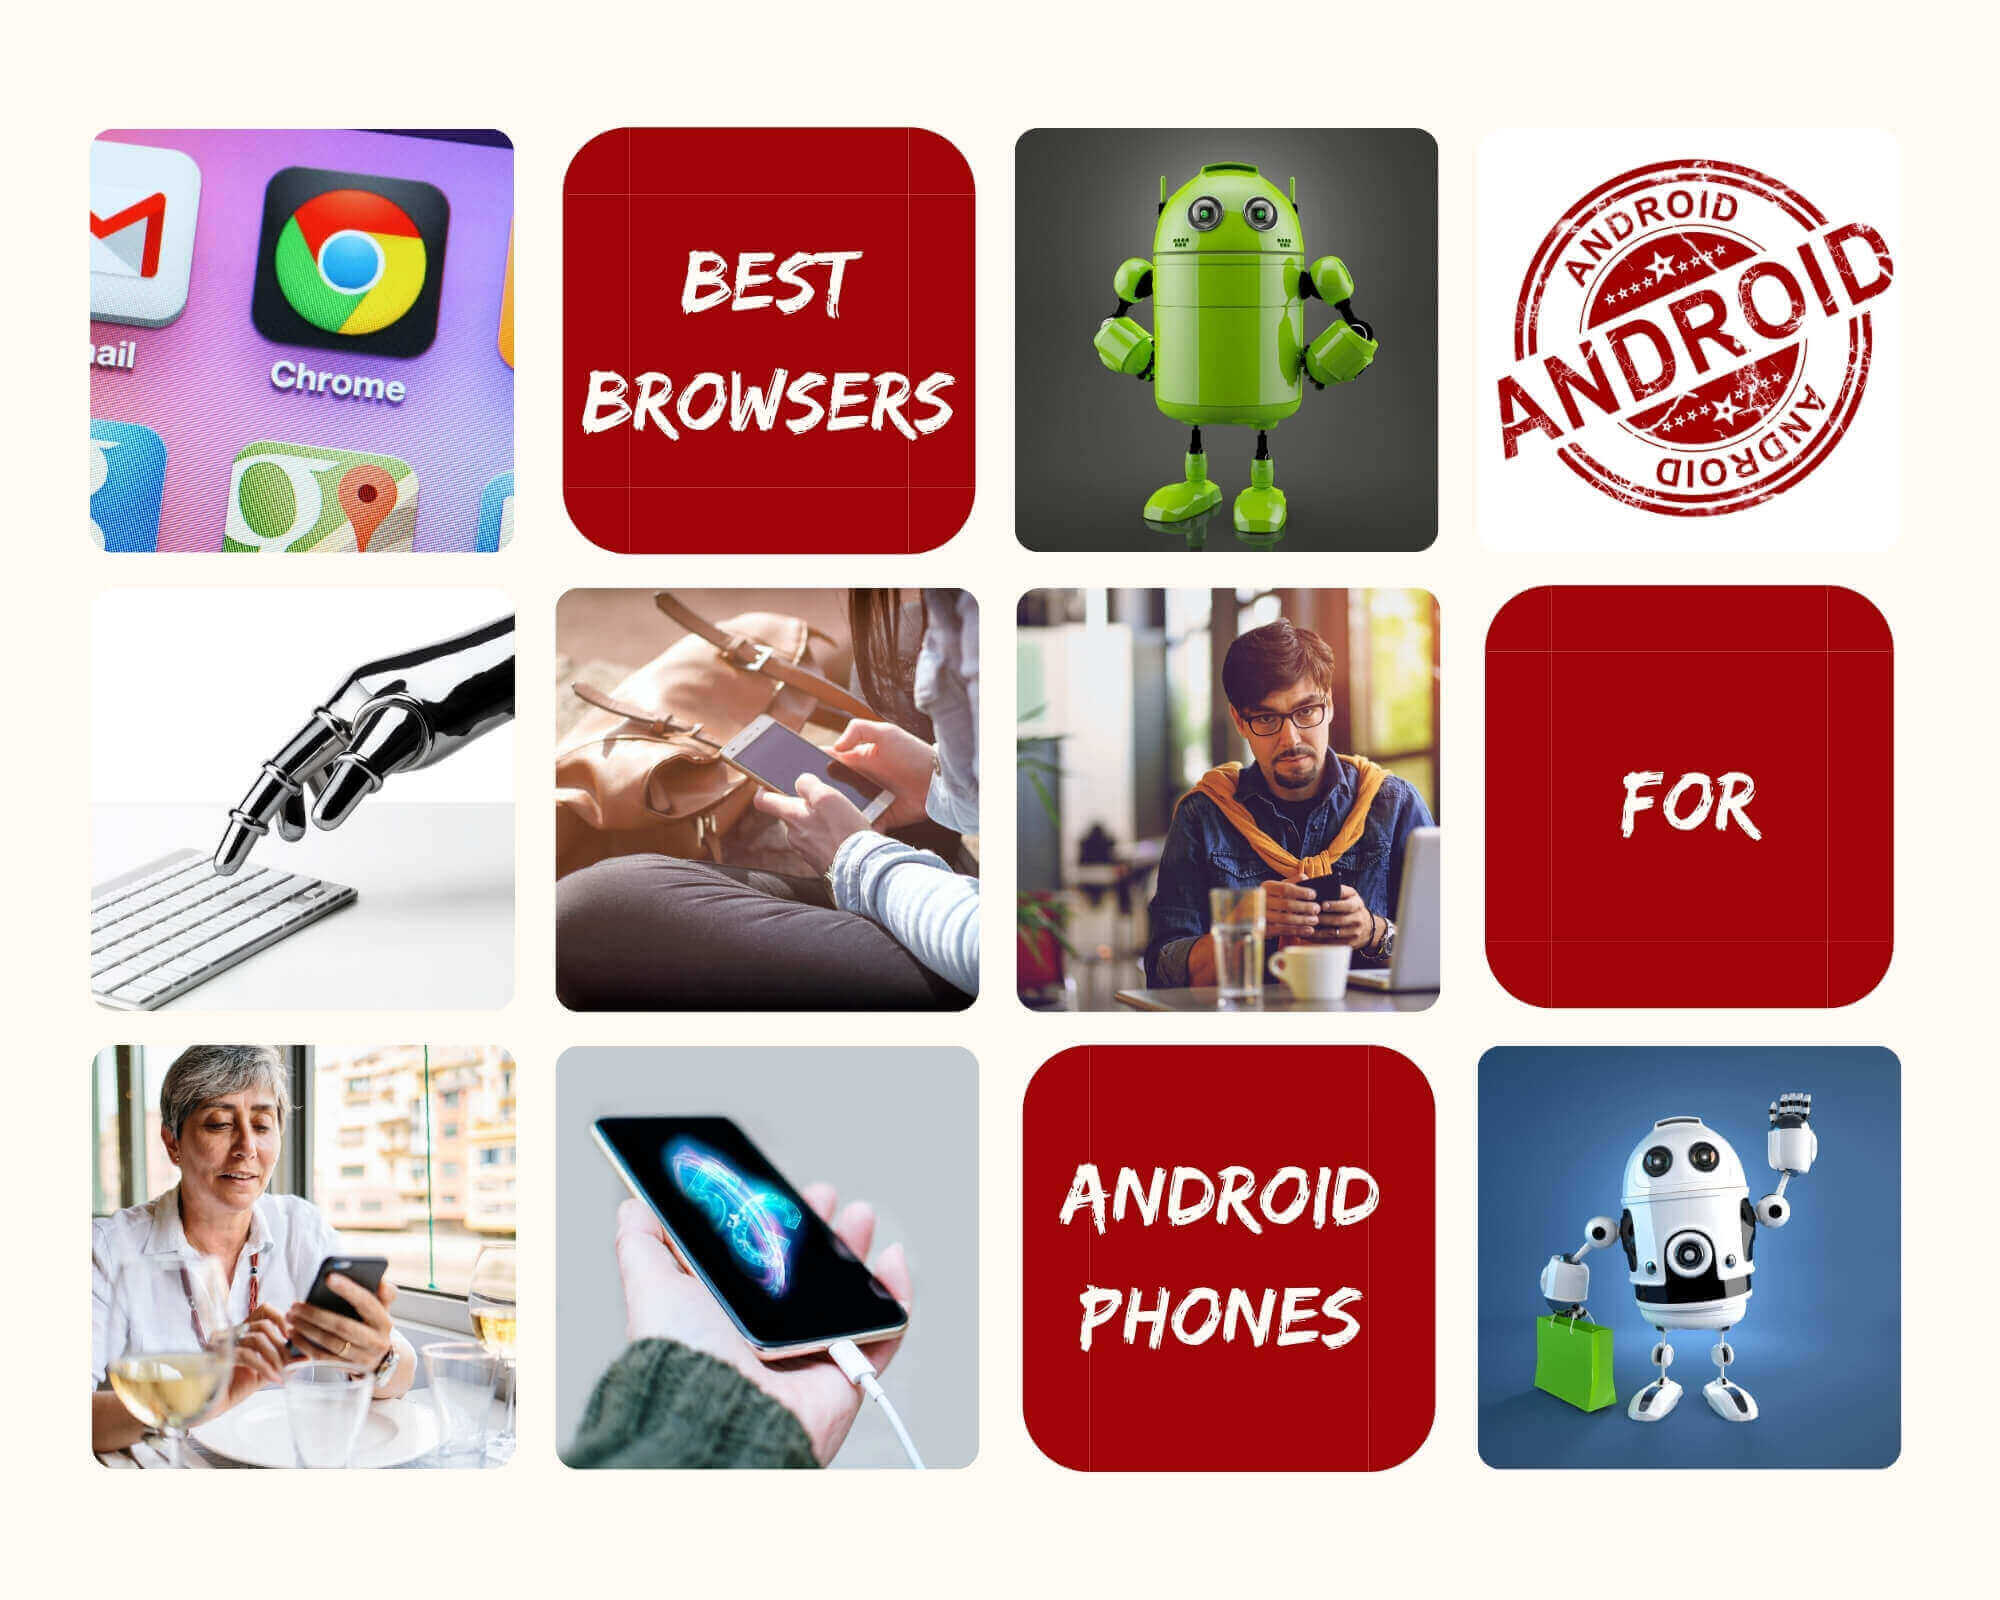 Best Internet Browsers for Android Phones